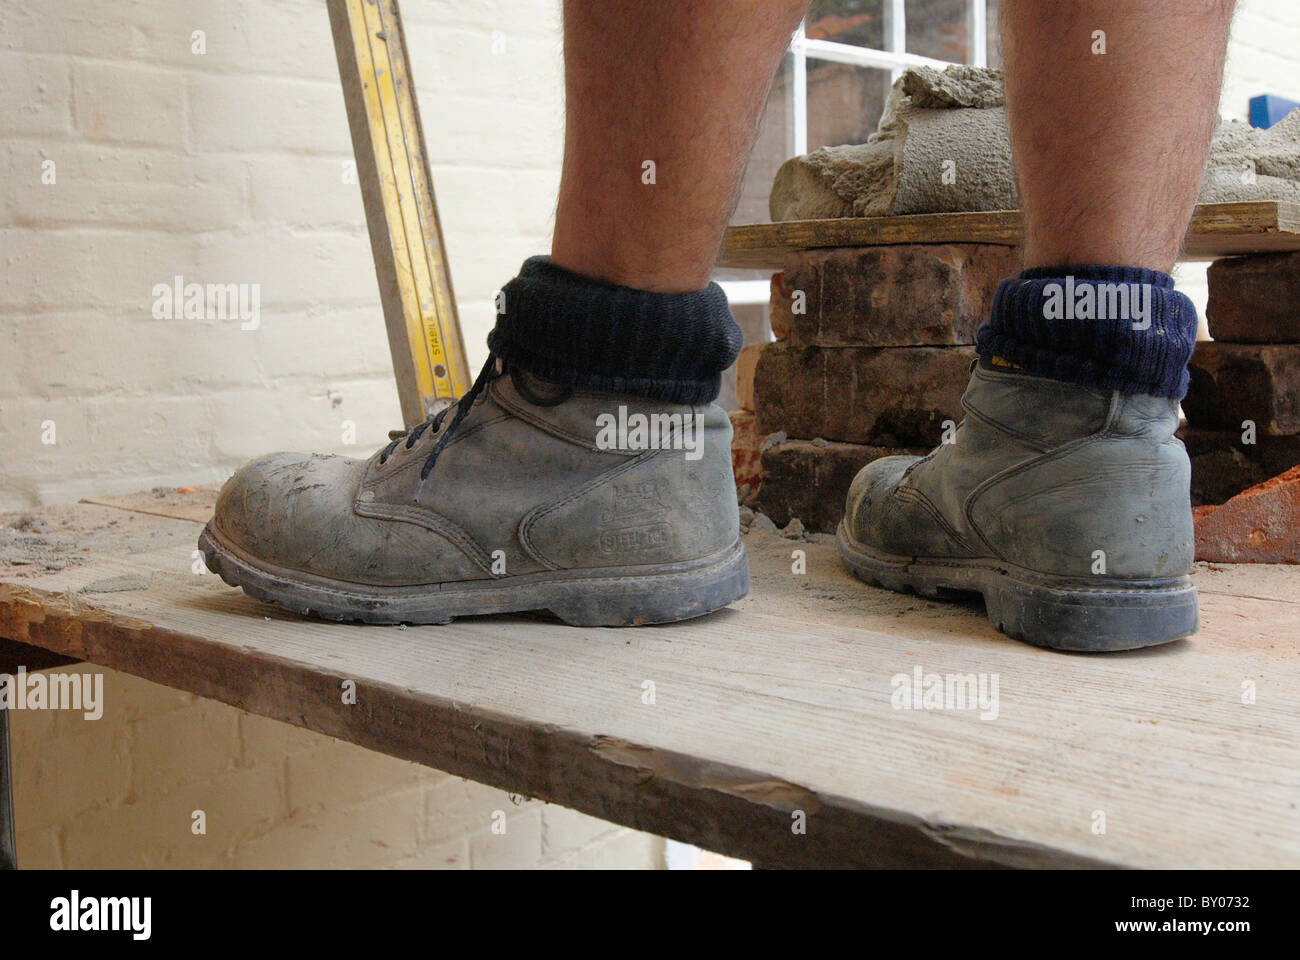 steel toe capped boots